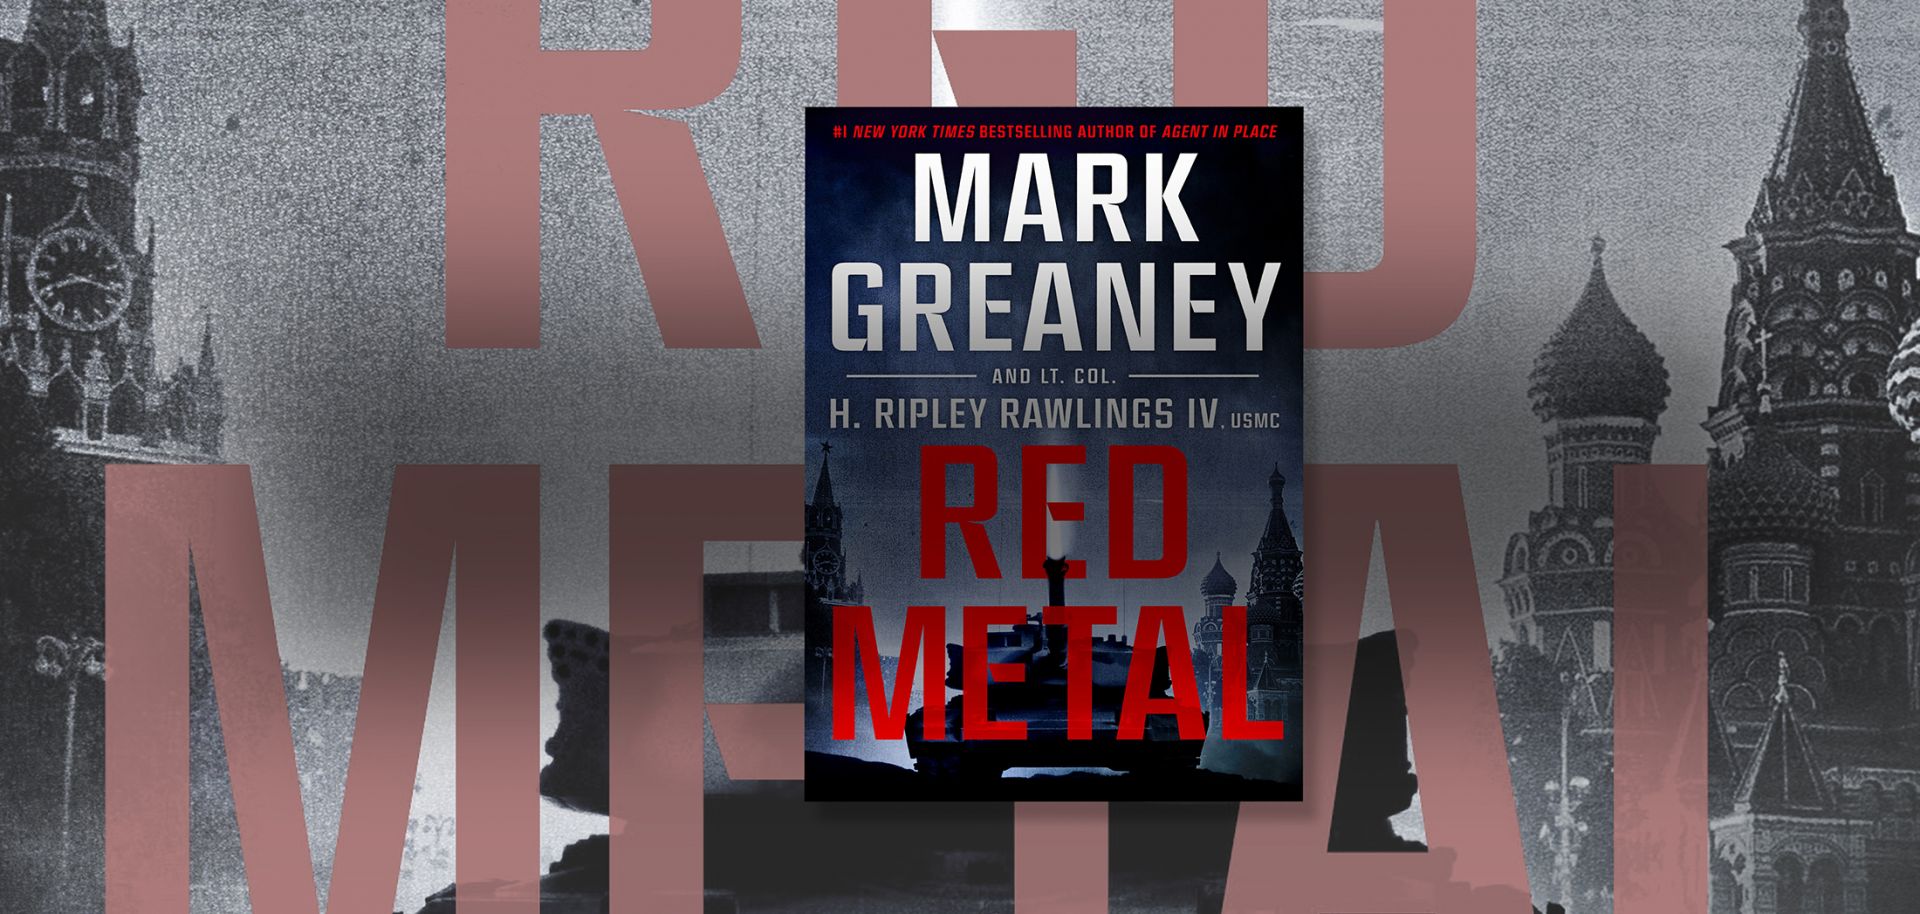 Mark Greaney and Lt. Col. H. Ripley Rawlings IV discuss their new book, Red Metal.